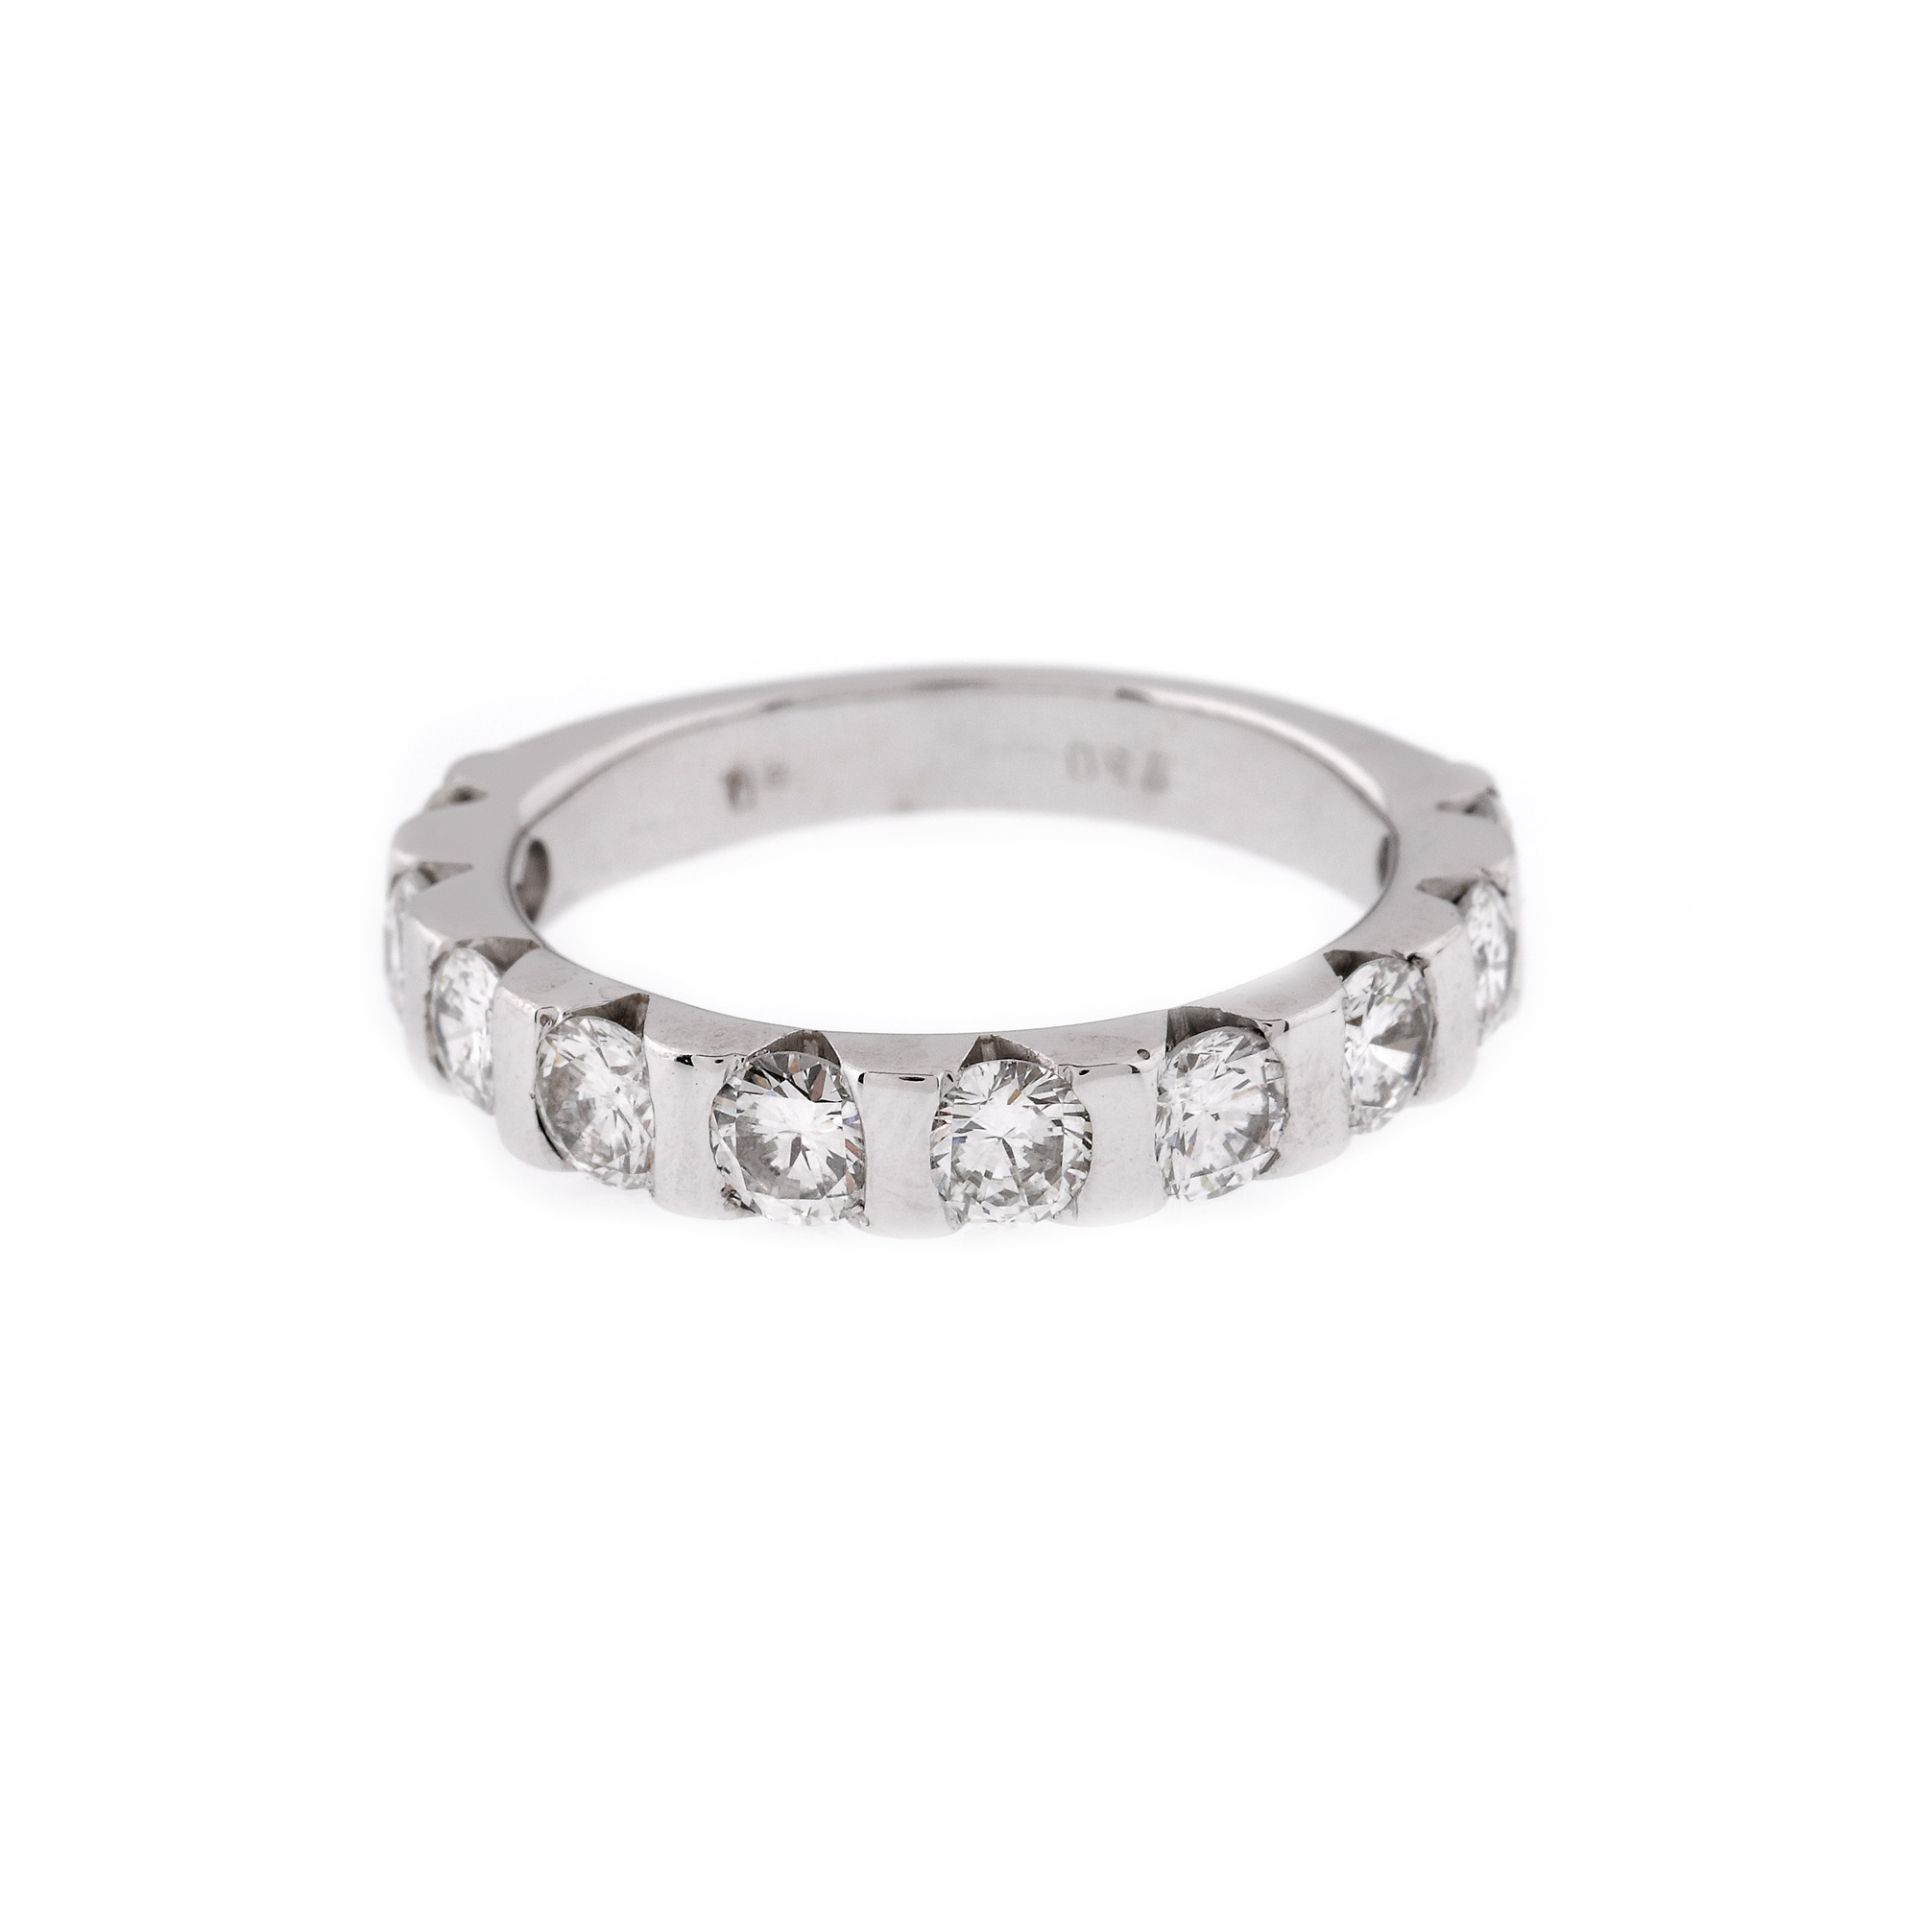 White gold ring, decorated with diamonds